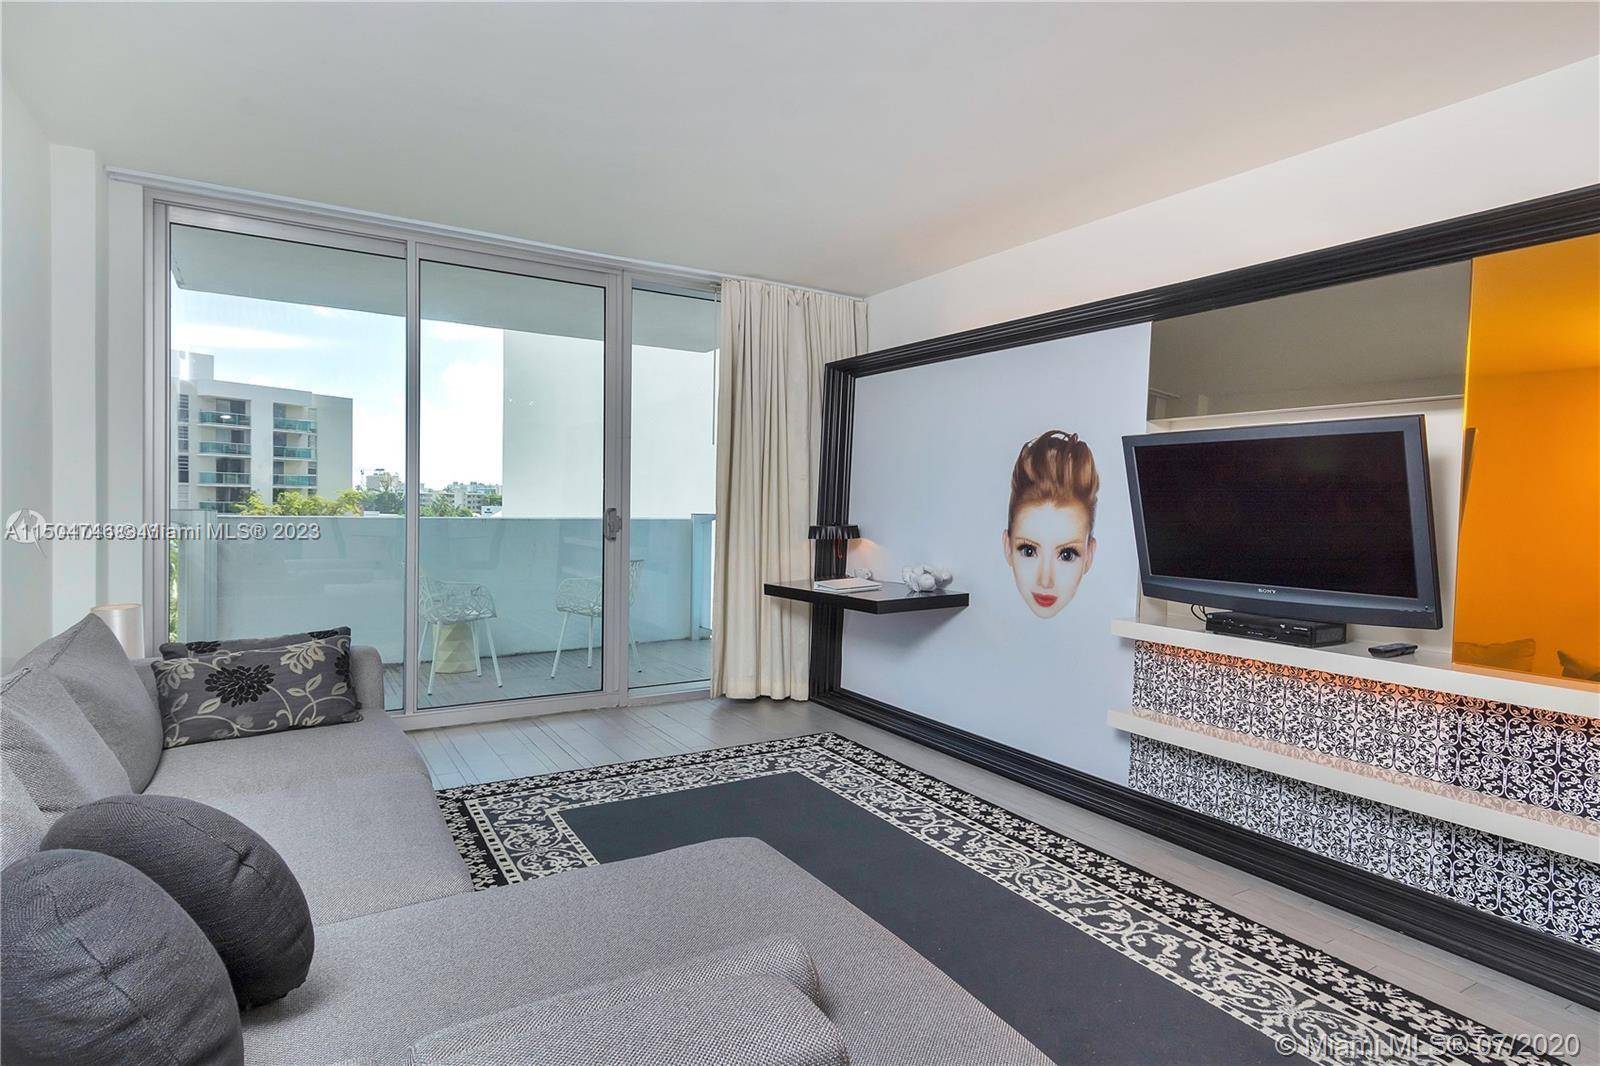 AMAZING HIGH FLOOR 1 BEDROOM CORNER UNIT WITH BALCONY WITH 1 QUEEN BED IN THE BEDROOM 1 QUEEN SOFA BED IN THE LIVING ROOM AT THE FAMOUS 1100 WEST CONDO ...